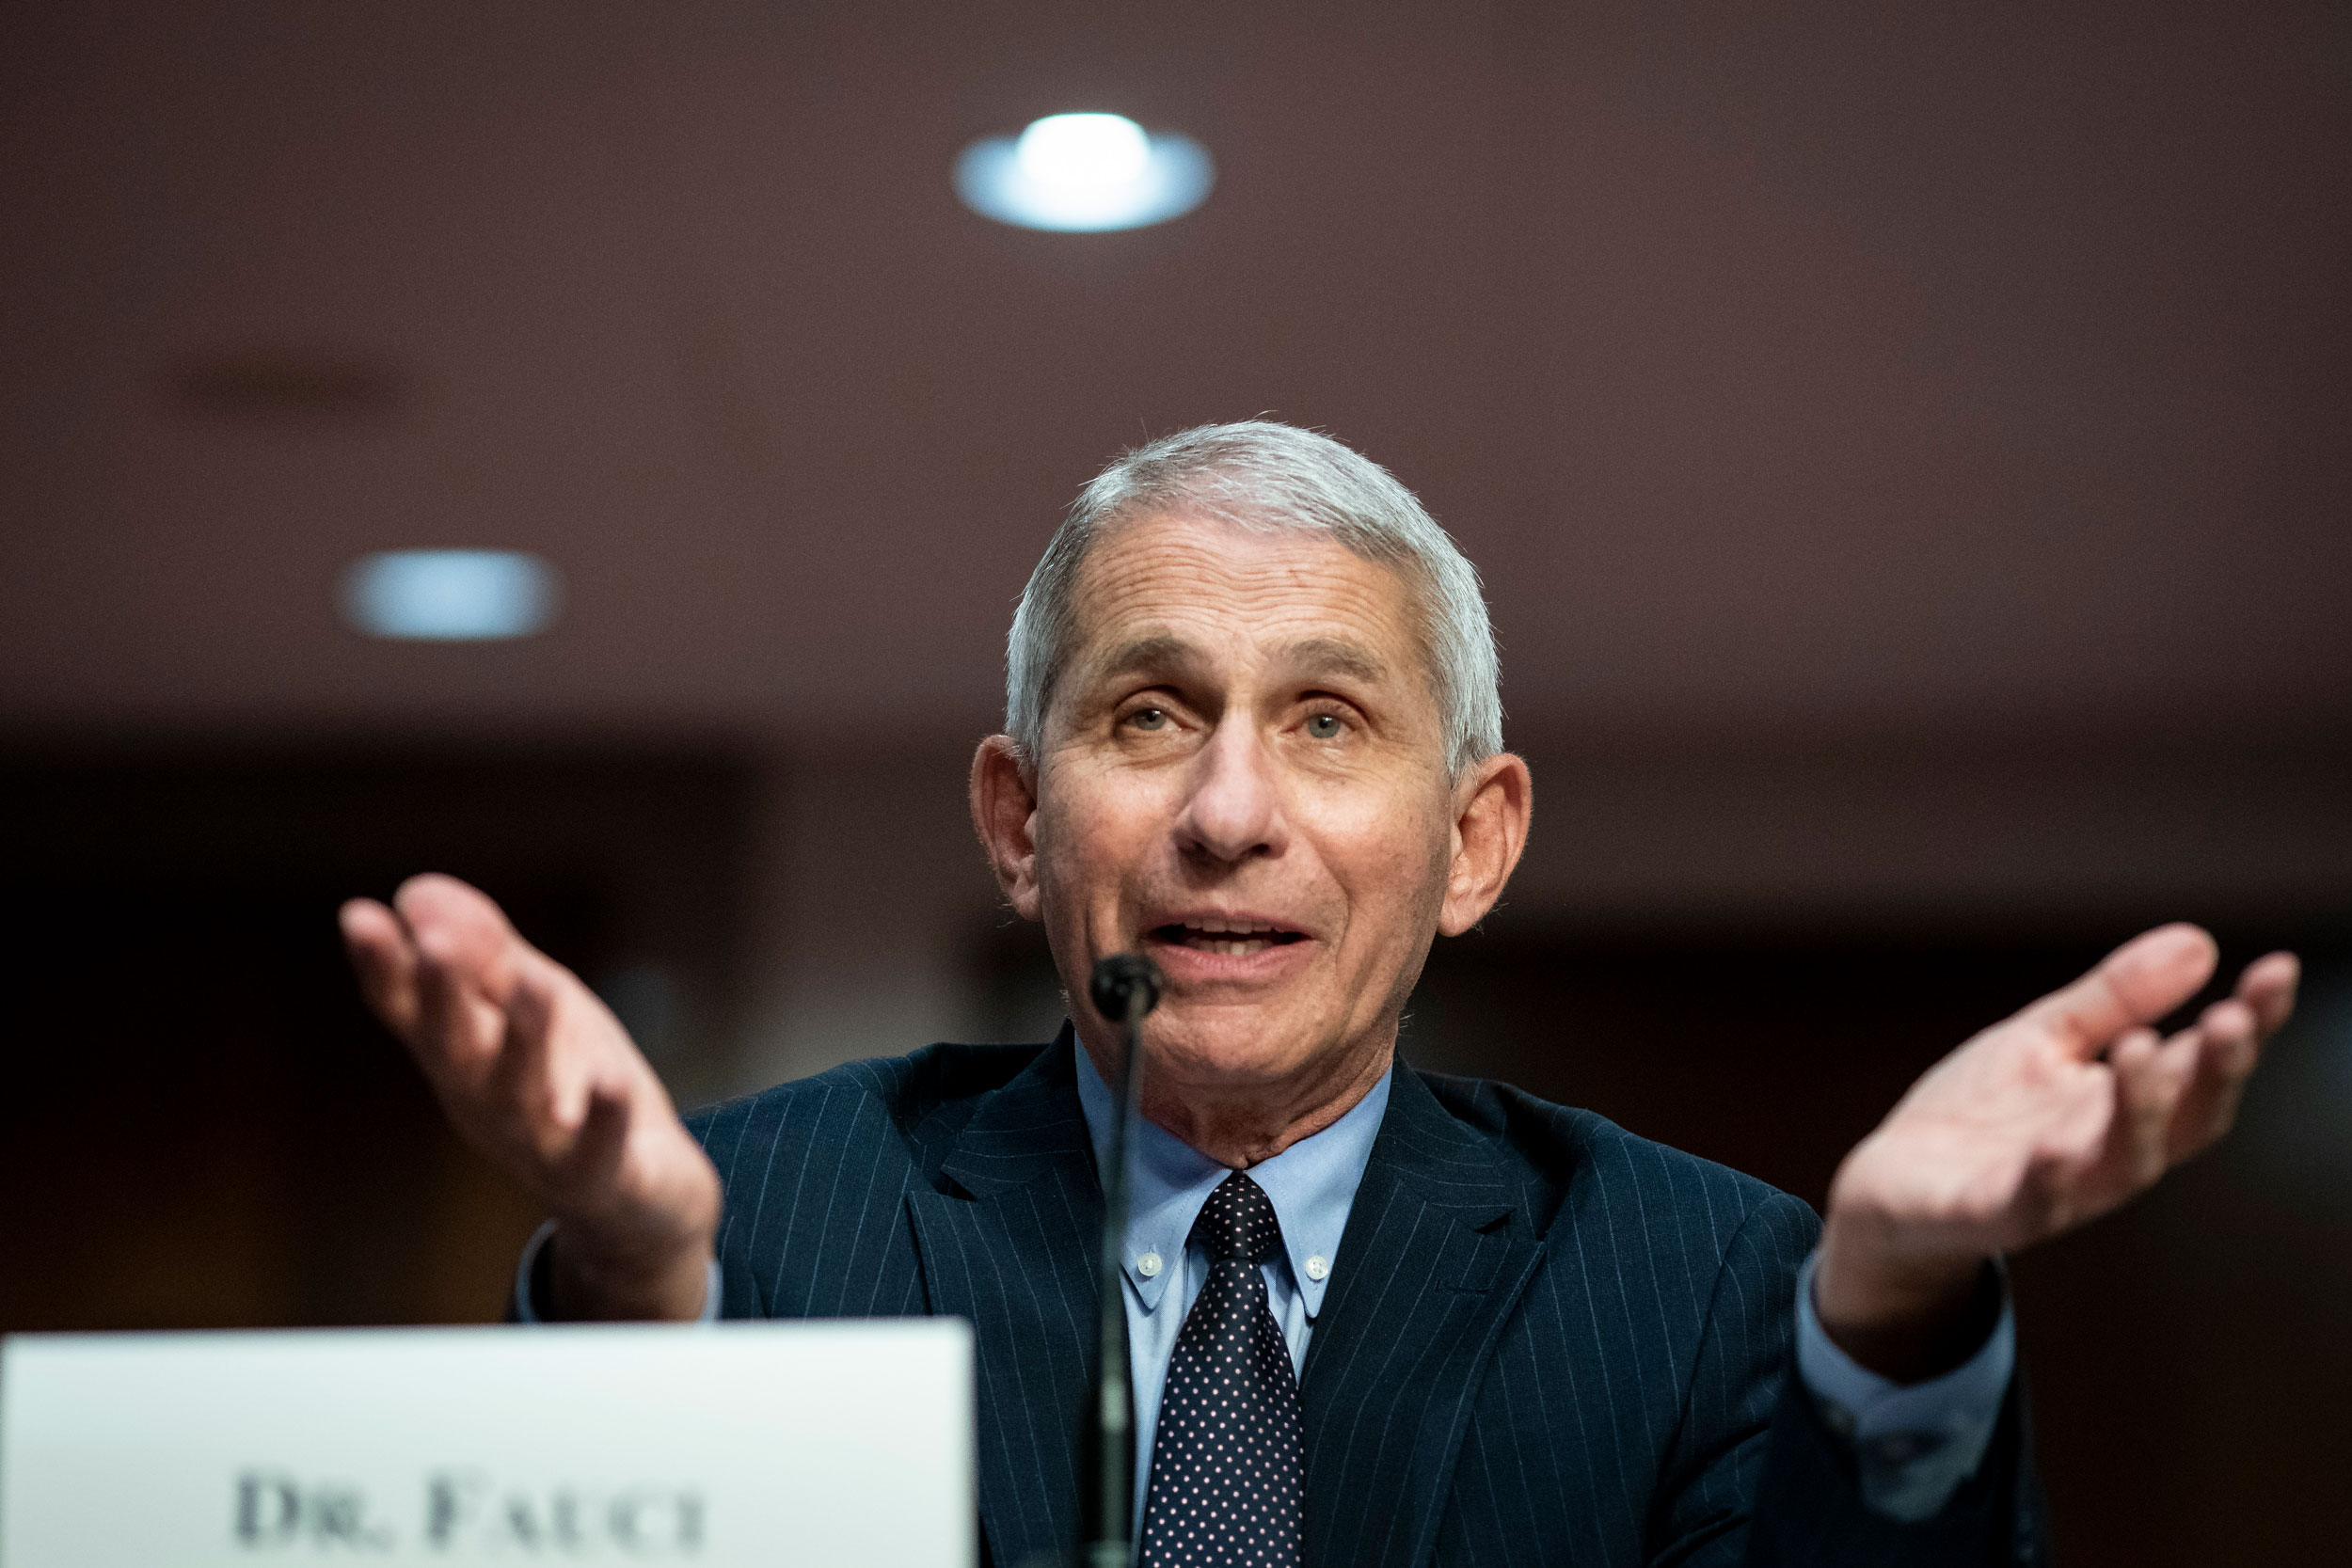 Dr. Anthony Fauci, director of the National Institute of Allergy and Infectious Diseases, speaks during a Senate Health, Education, Labor and Pensions Committee hearing on June 30 in Washington, DC. 